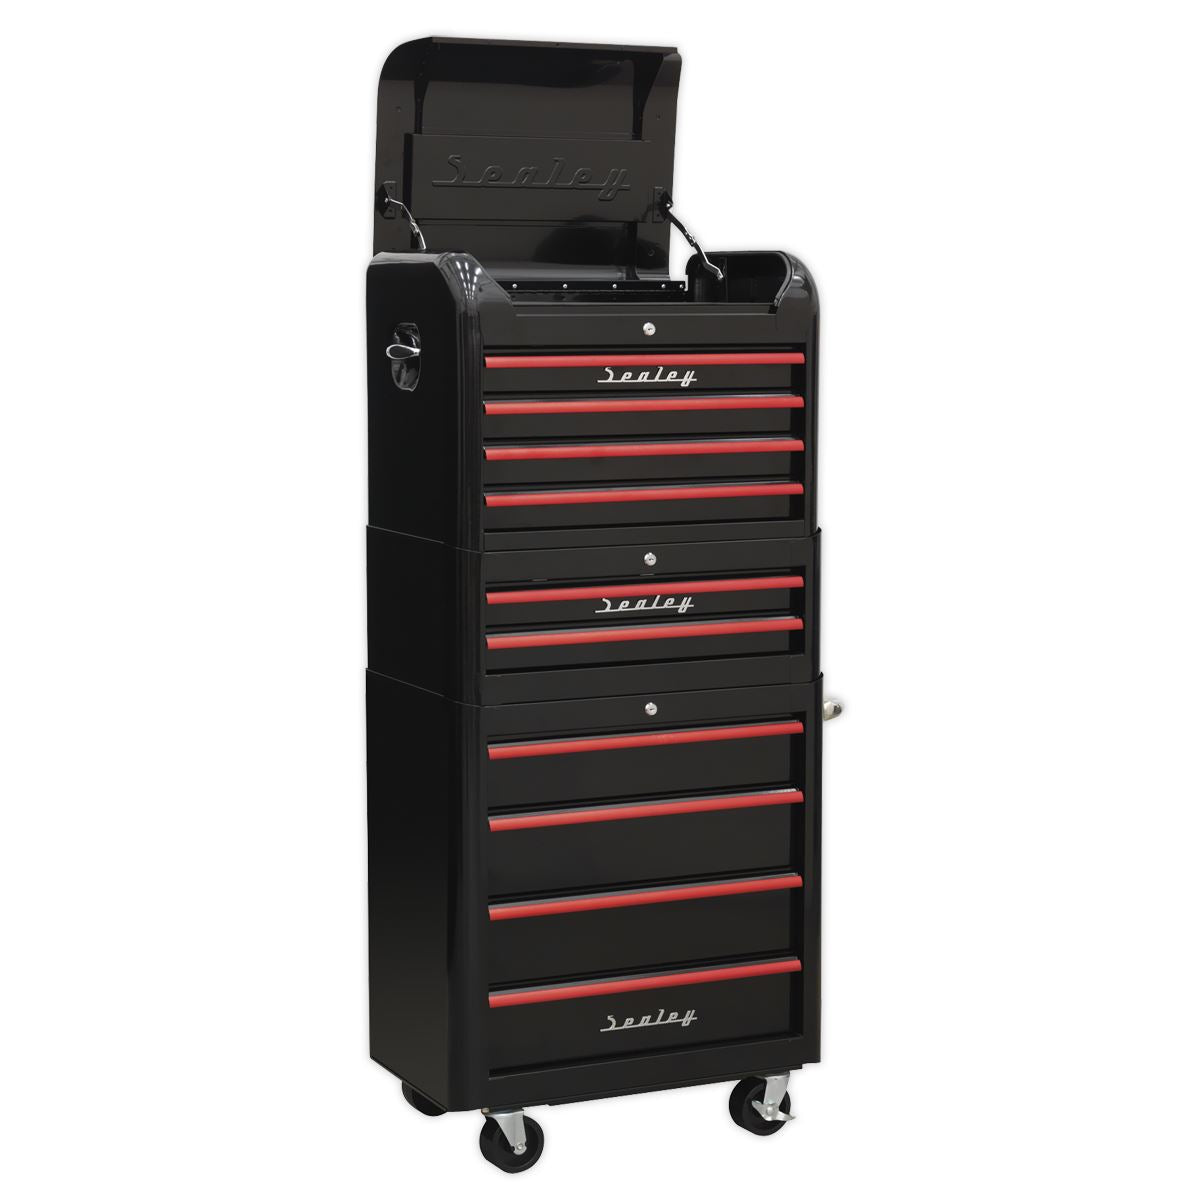 Sealey Premier Retro Style Topchest, Mid-Box & Rollcab Combination 10 Drawer - Black with Red Anodised Drawer Pulls